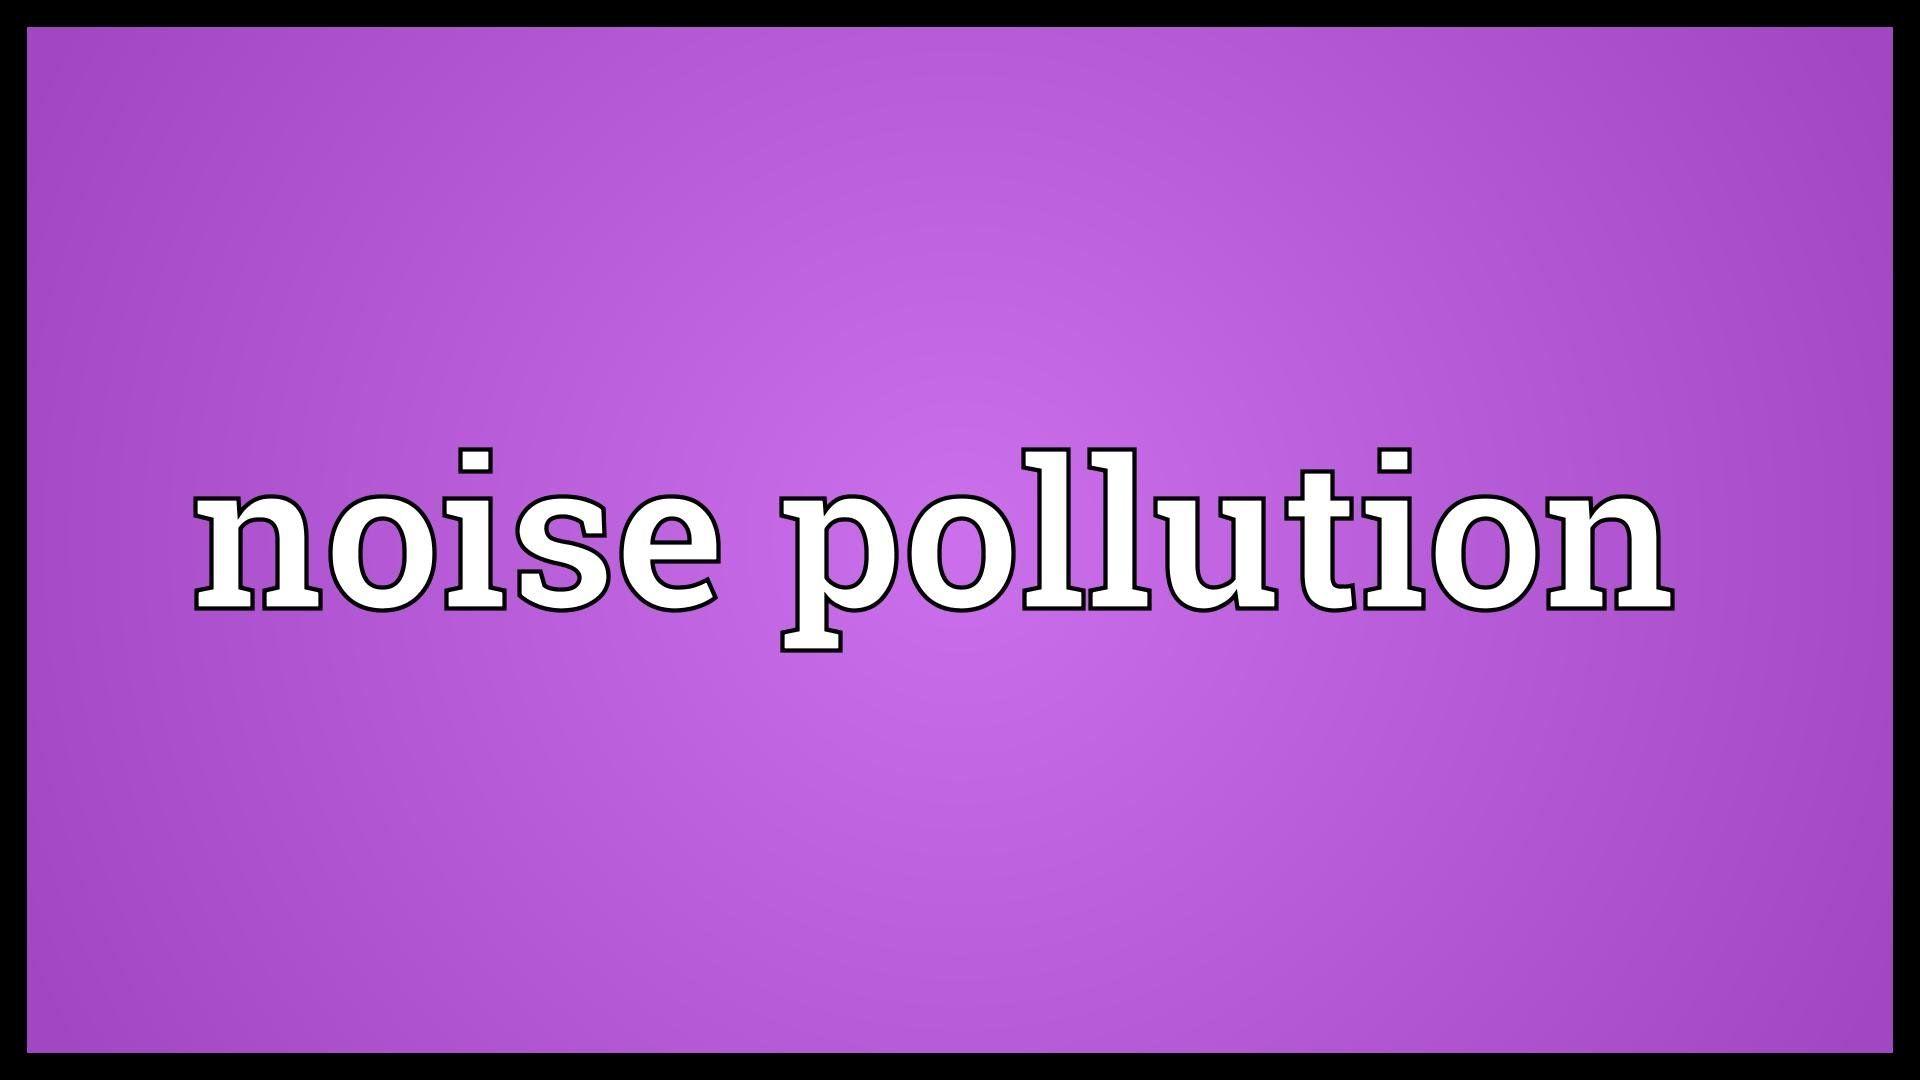 Noise pollution Meaning